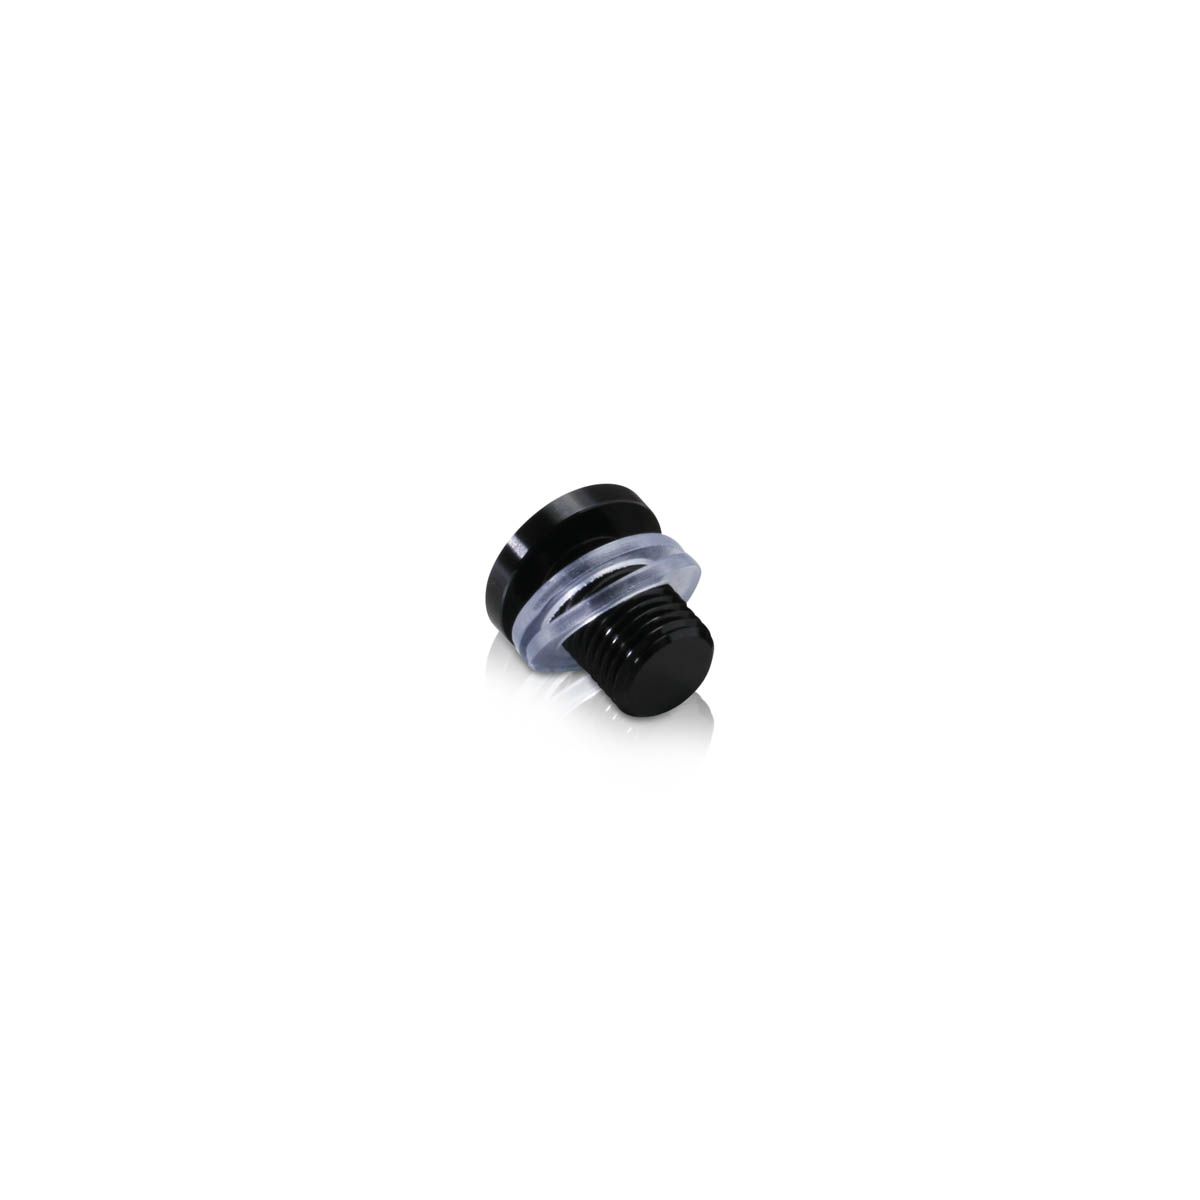 AL16-12B Head replacement for Mbs-Standoffs 5/8'' Diameter x 1/2'' Barrel Length, Aluminum Black Anodized Finish Standoffs (Includes 2 Silicone Washers).